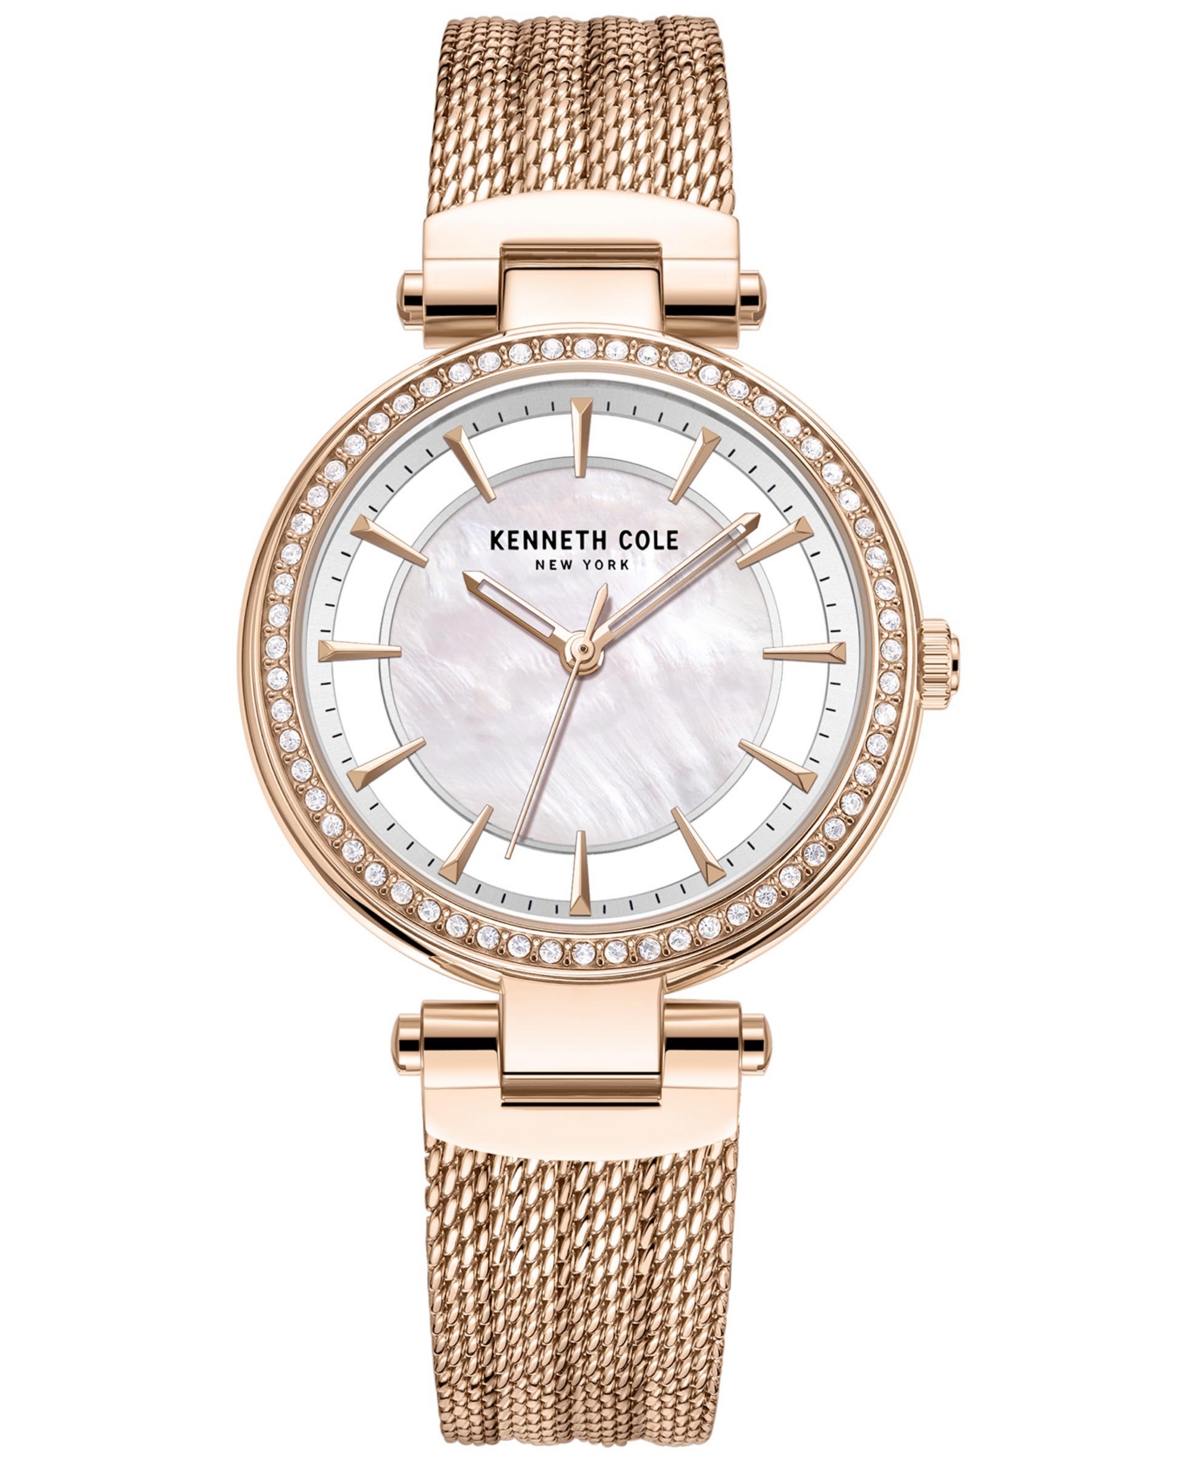 Kenneth Cole New York Women's Transparency Rose Gold-Tone Stainless Steel Mesh Bracelet Watch 34mm